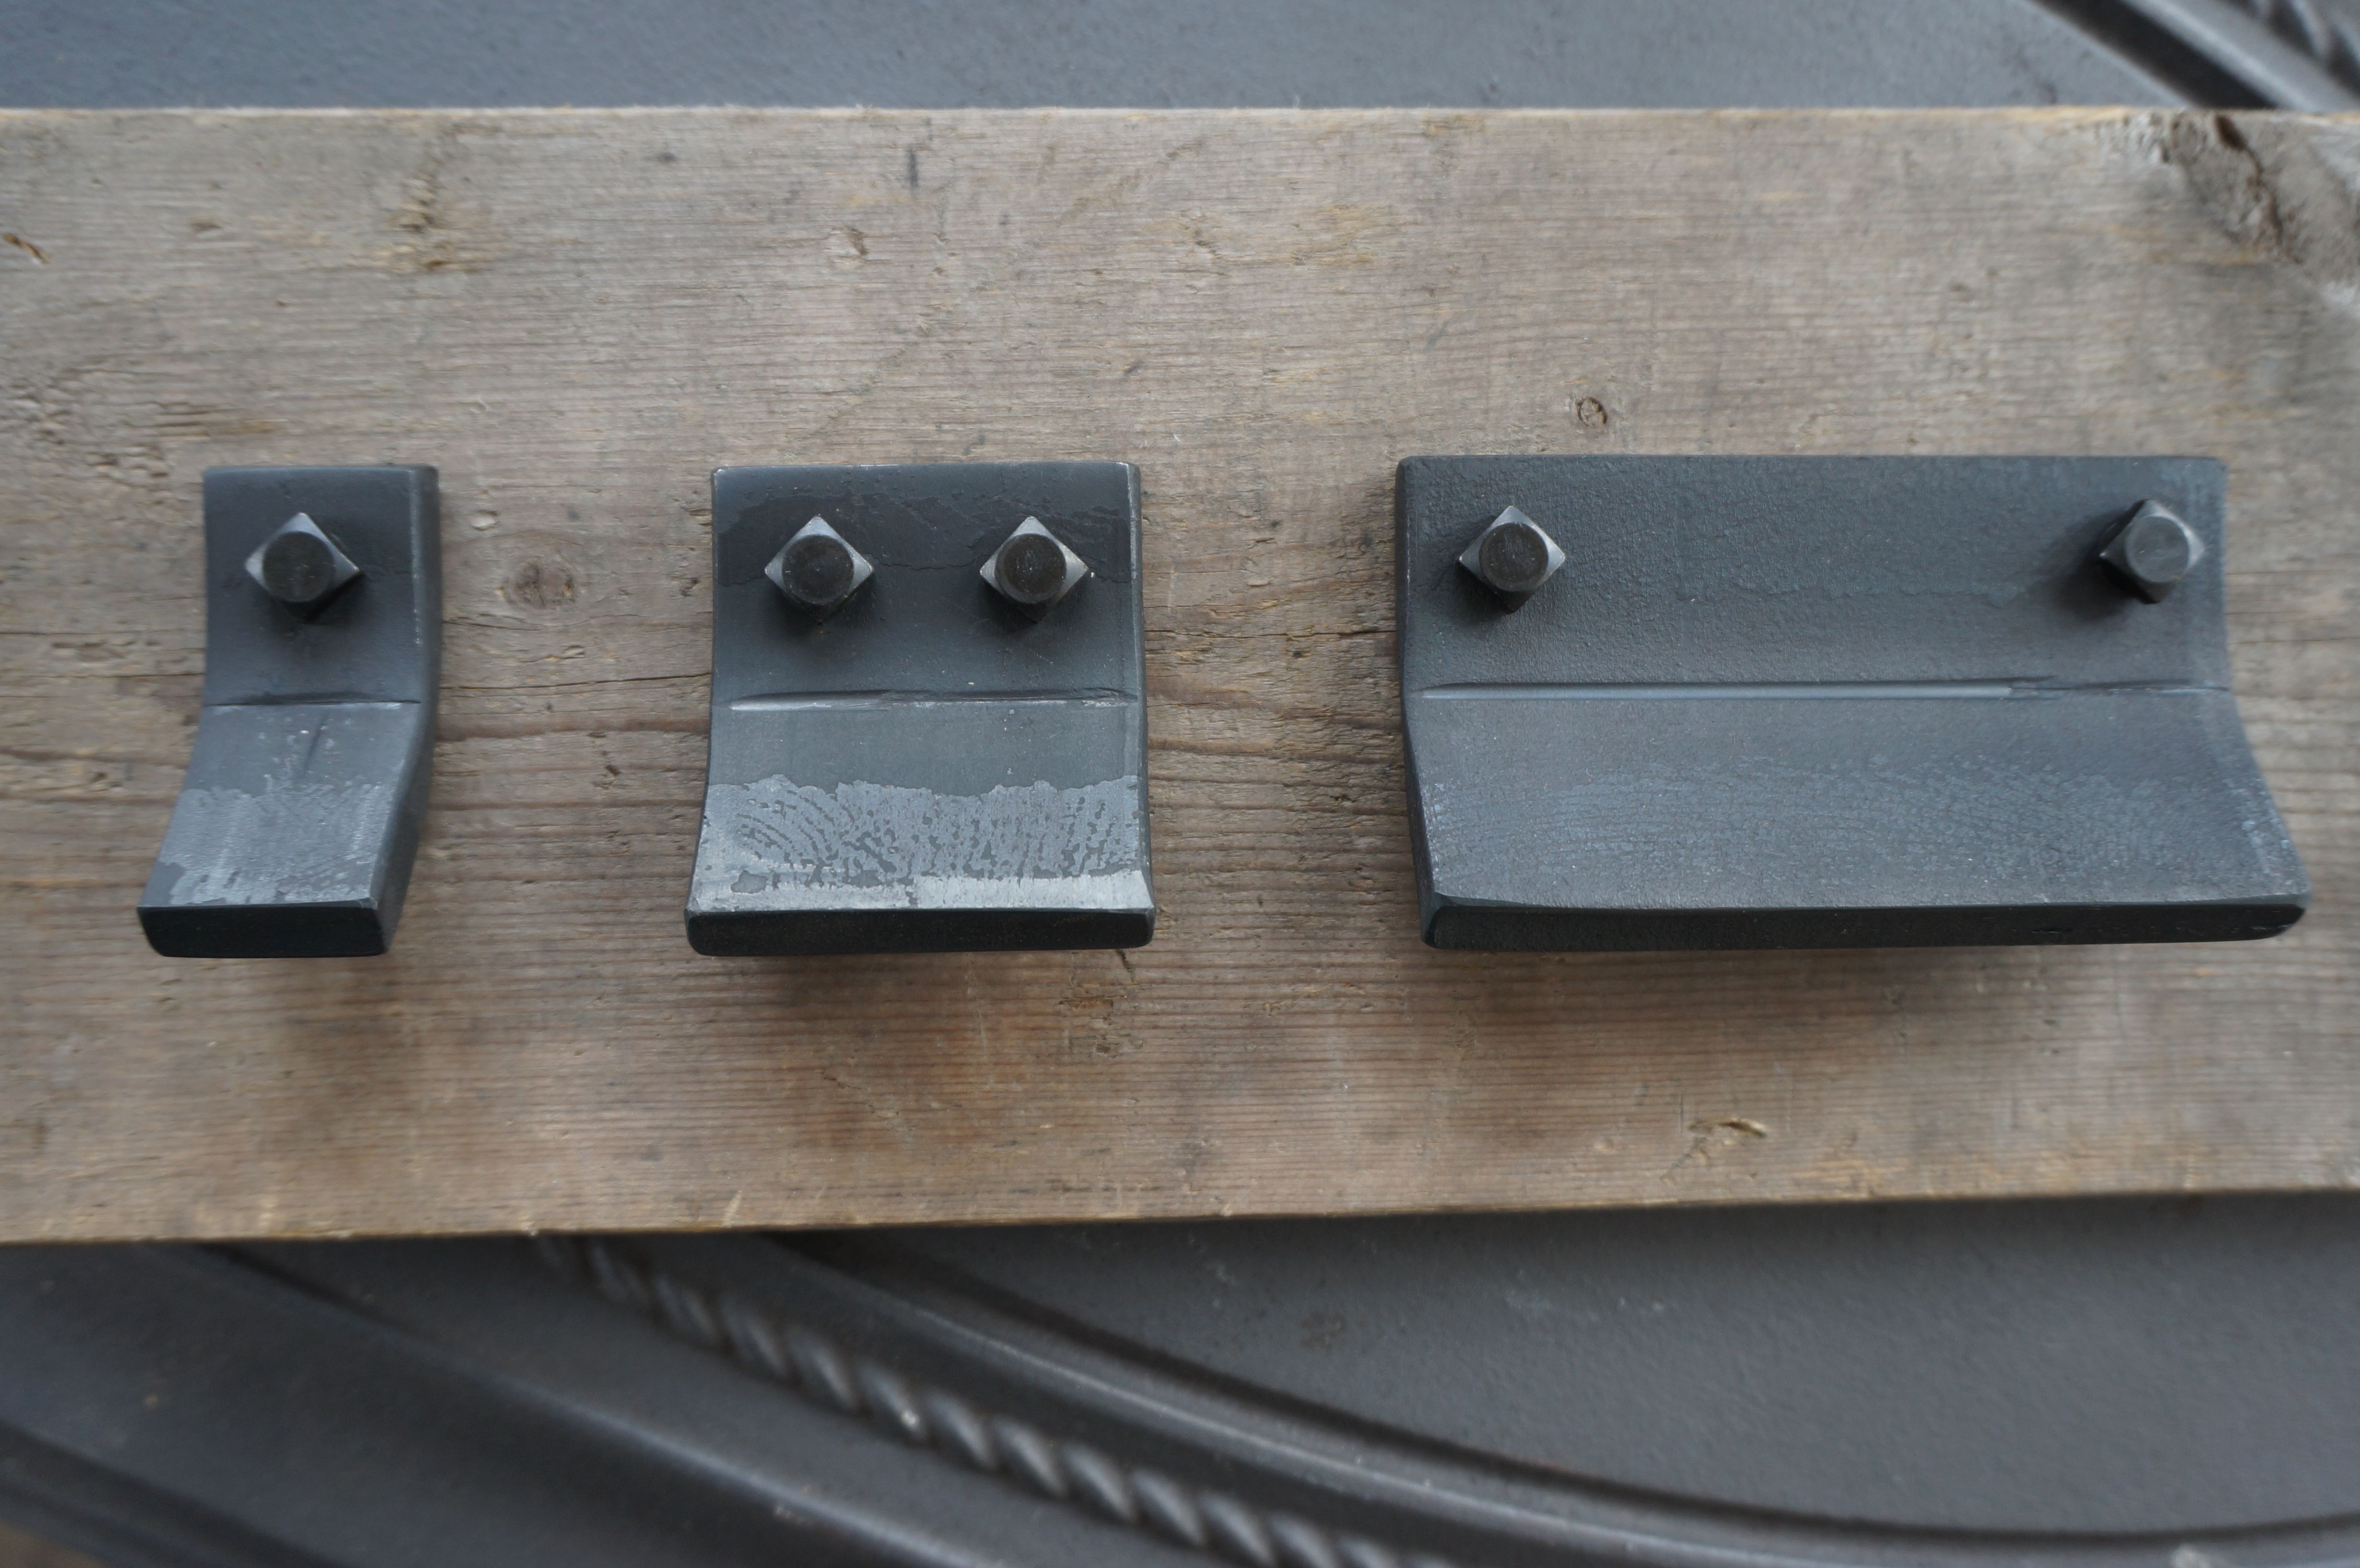 Buy Custom Made Industrial Drawer Pulls, made to order from SteelDesign